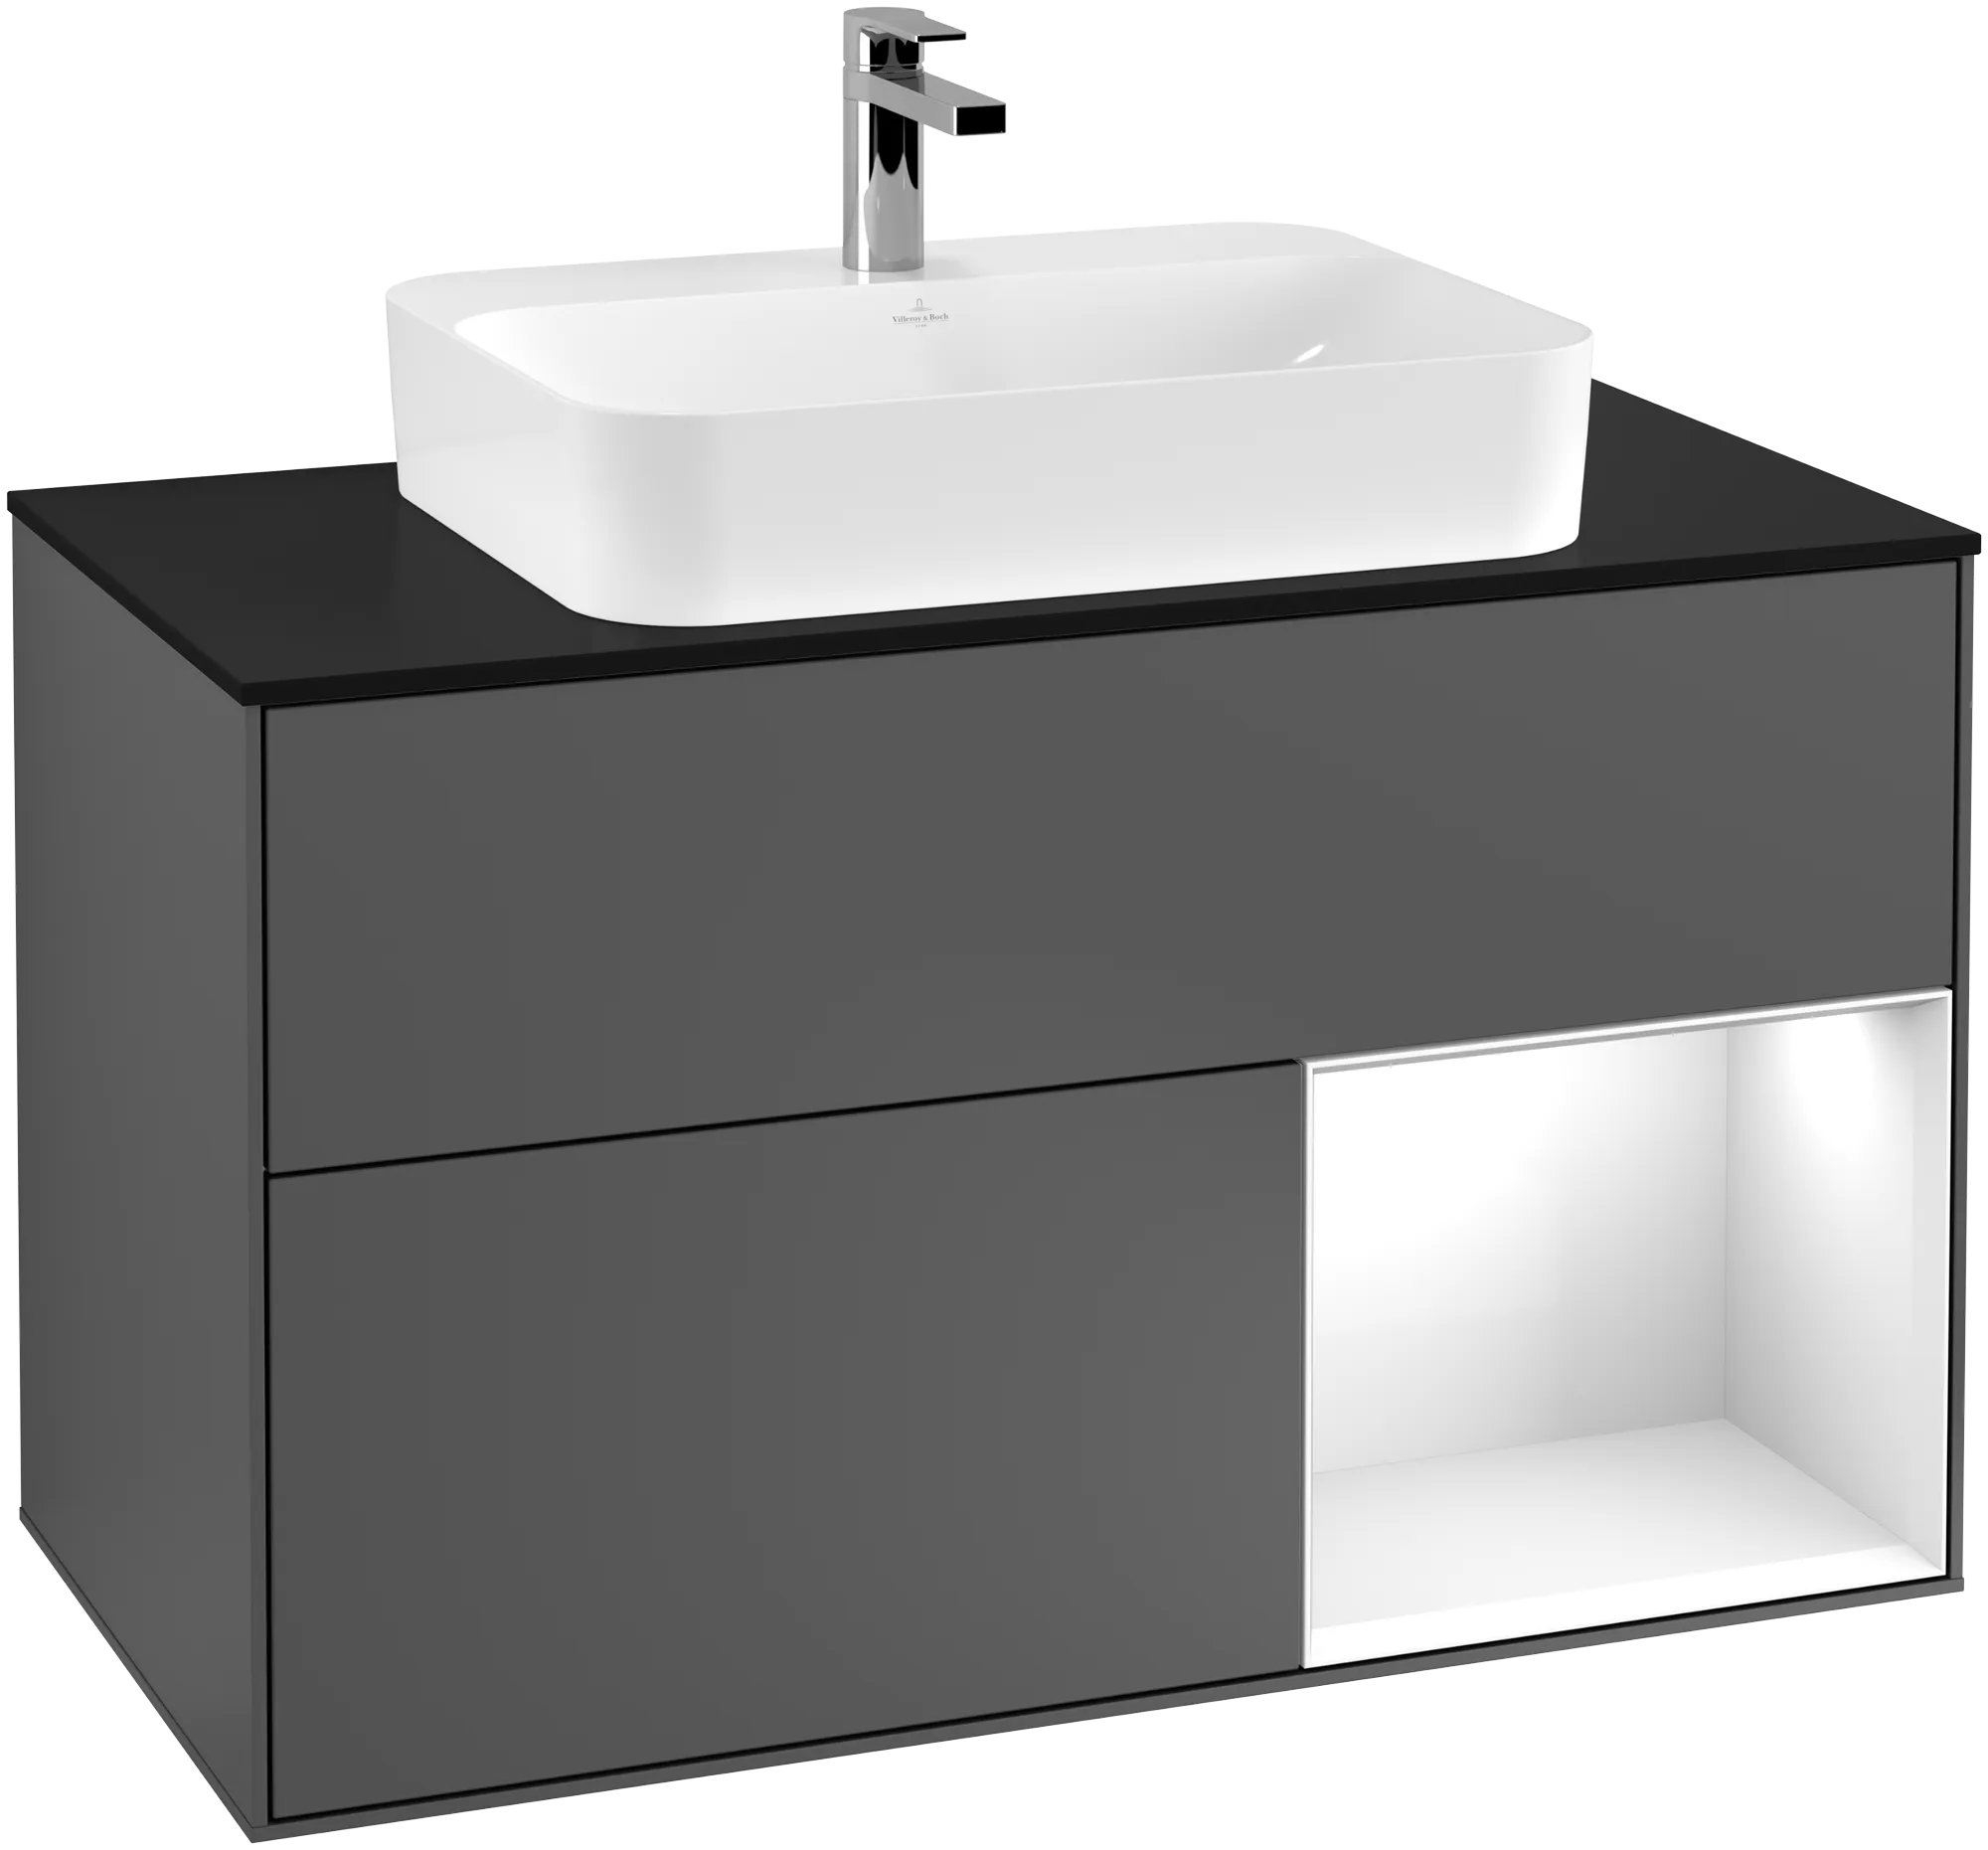 VILLEROY BOCH Finion Vanity unit, with lighting, 2 pull-out compartments, 1000 x 603 x 501 mm, Anthracite Matt Lacquer / Glossy White Lacquer / Glass Black Matt #G372GFGK resmi